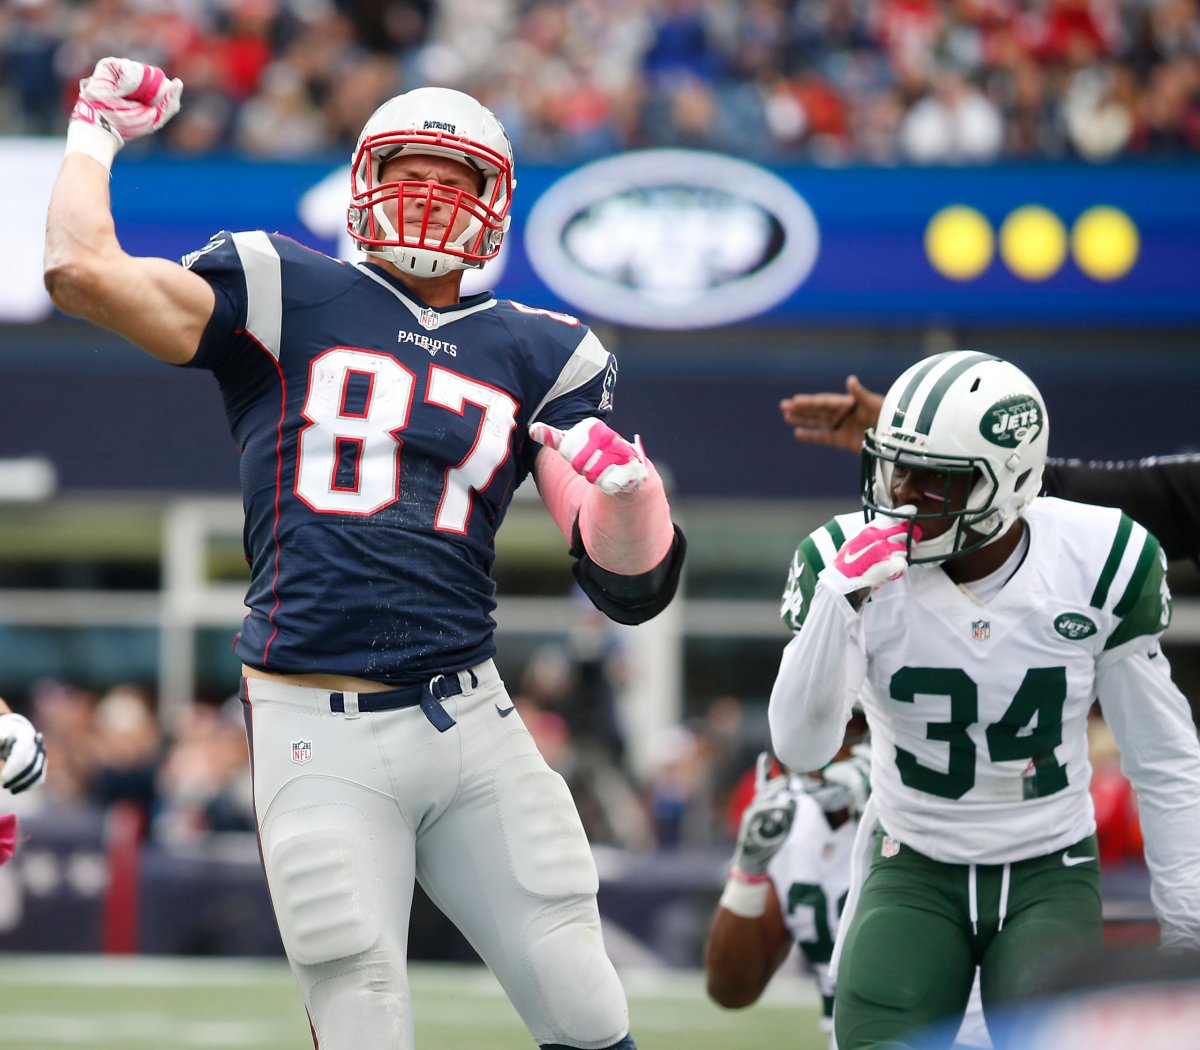 Everyone loves Rob Gronkowski, but they may not know just how great he is on